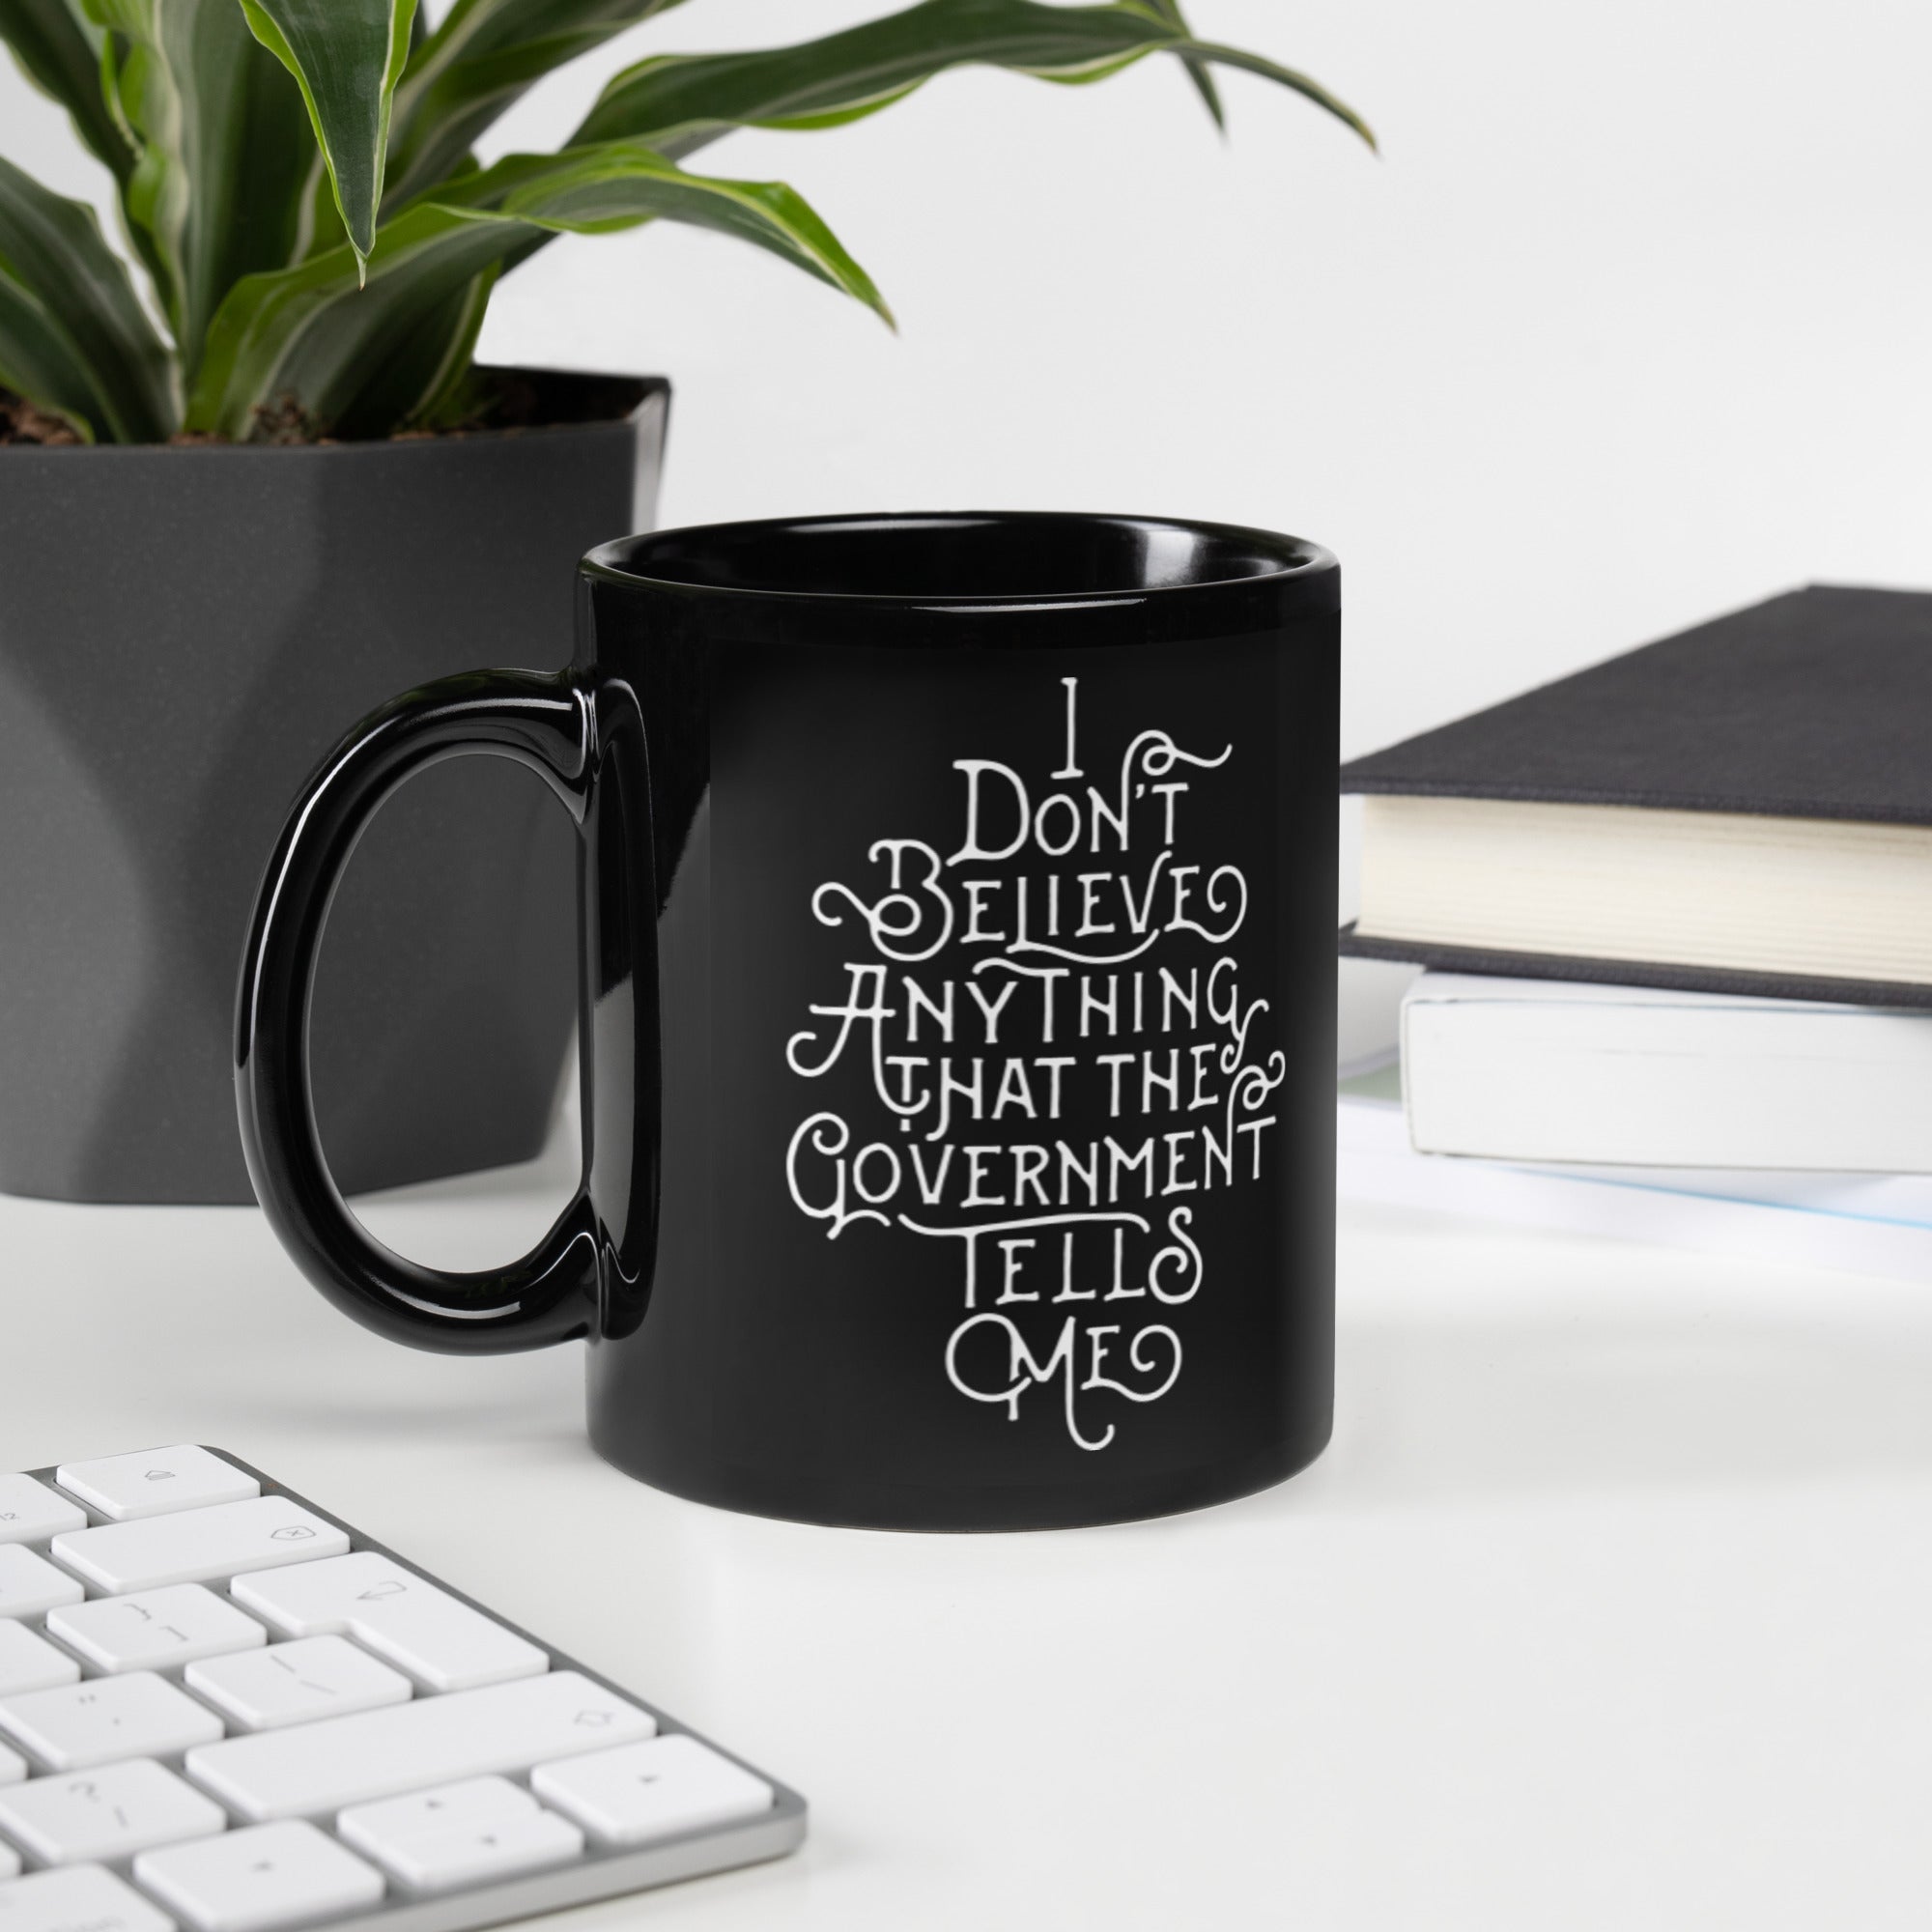 I don't Believe Anything the Government Tells Me Mug